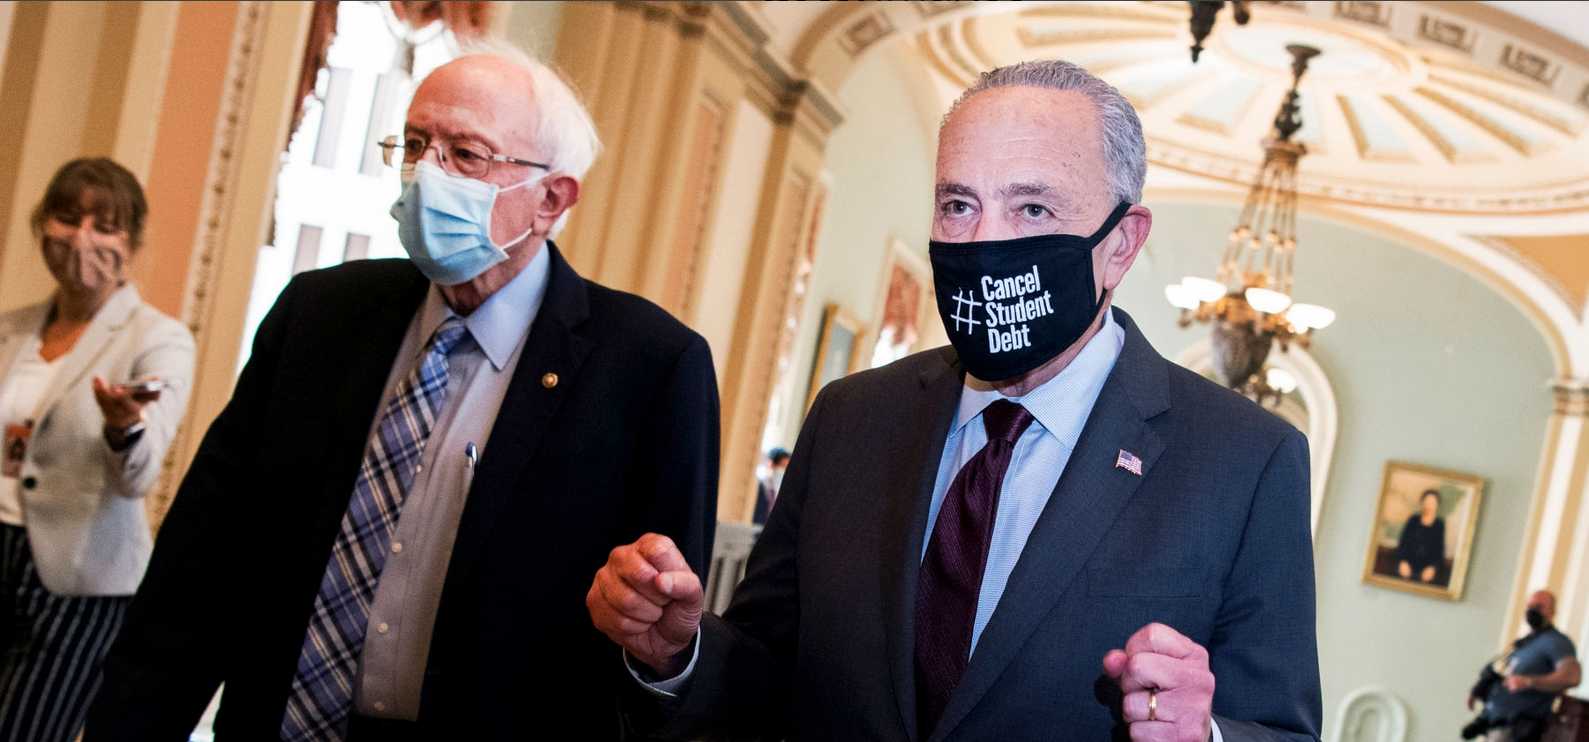 Bernie Sanders and Chuck Schumer on Capitol 